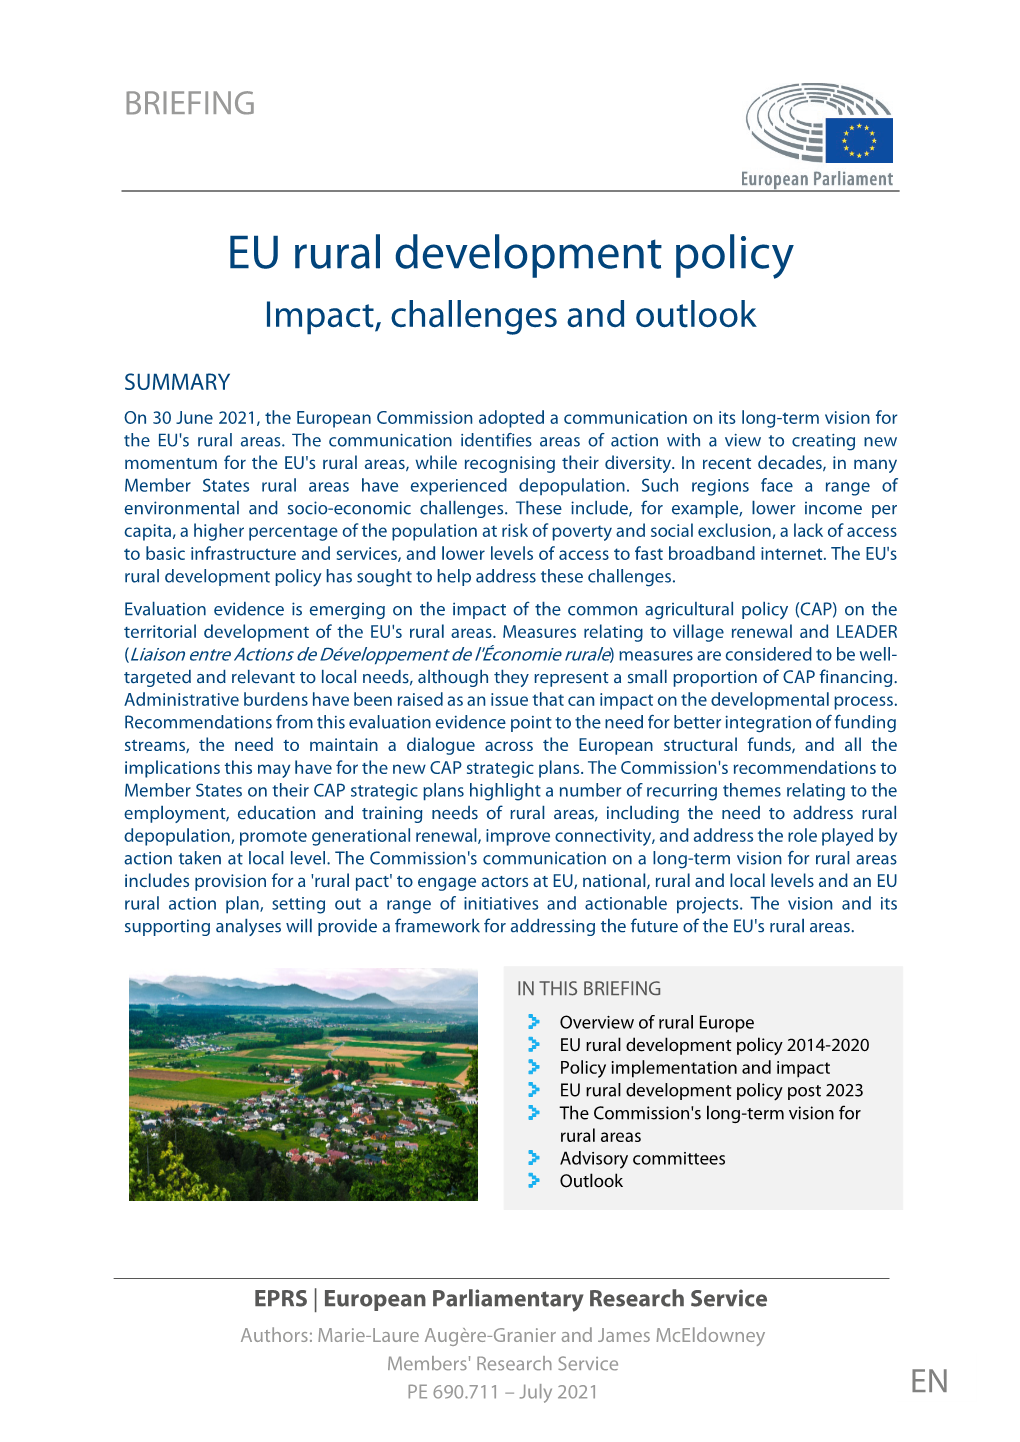 EU Rural Development Policy Impact, Challenges and Outlook